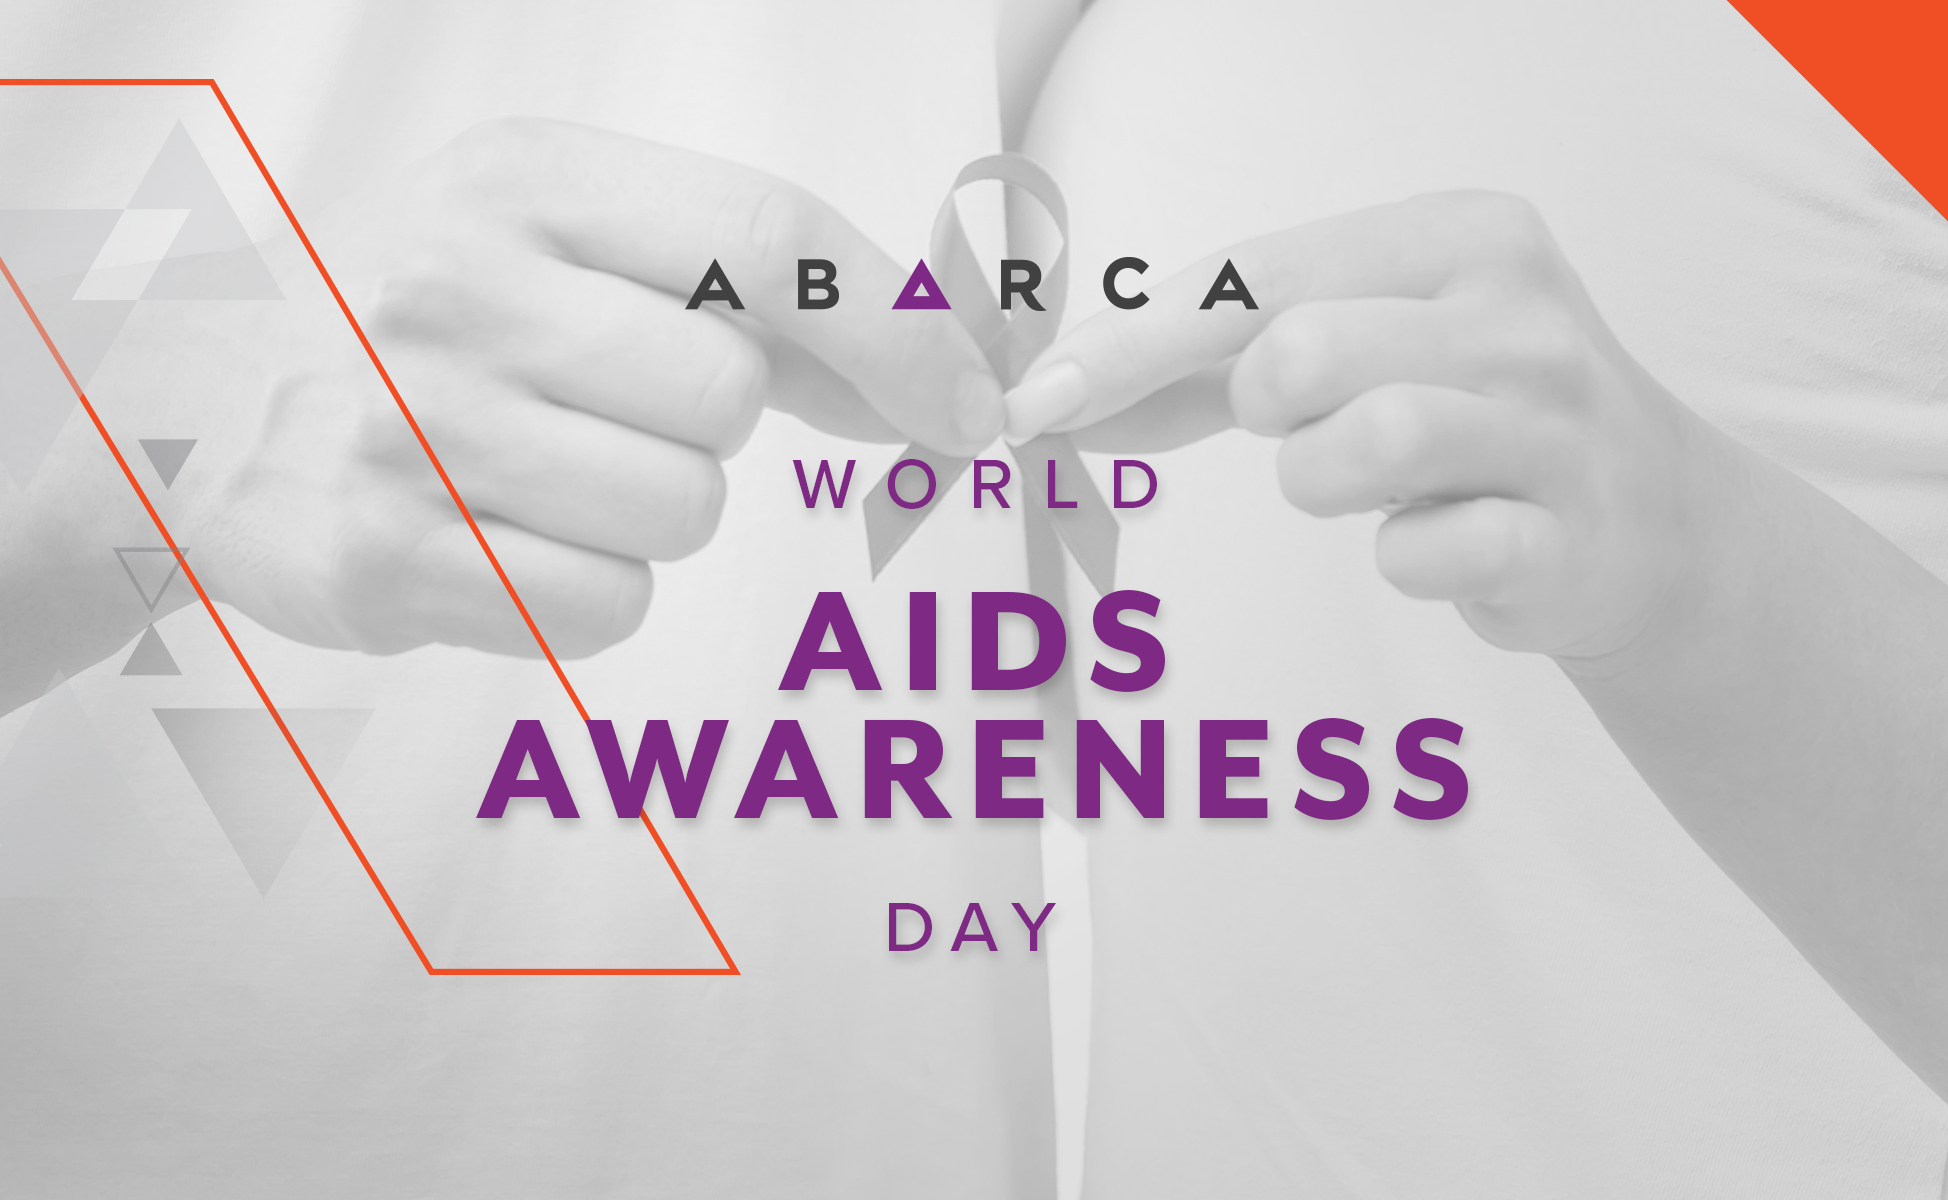 Abarca joins the fight to end the HIV/AIDS epidemic community by community